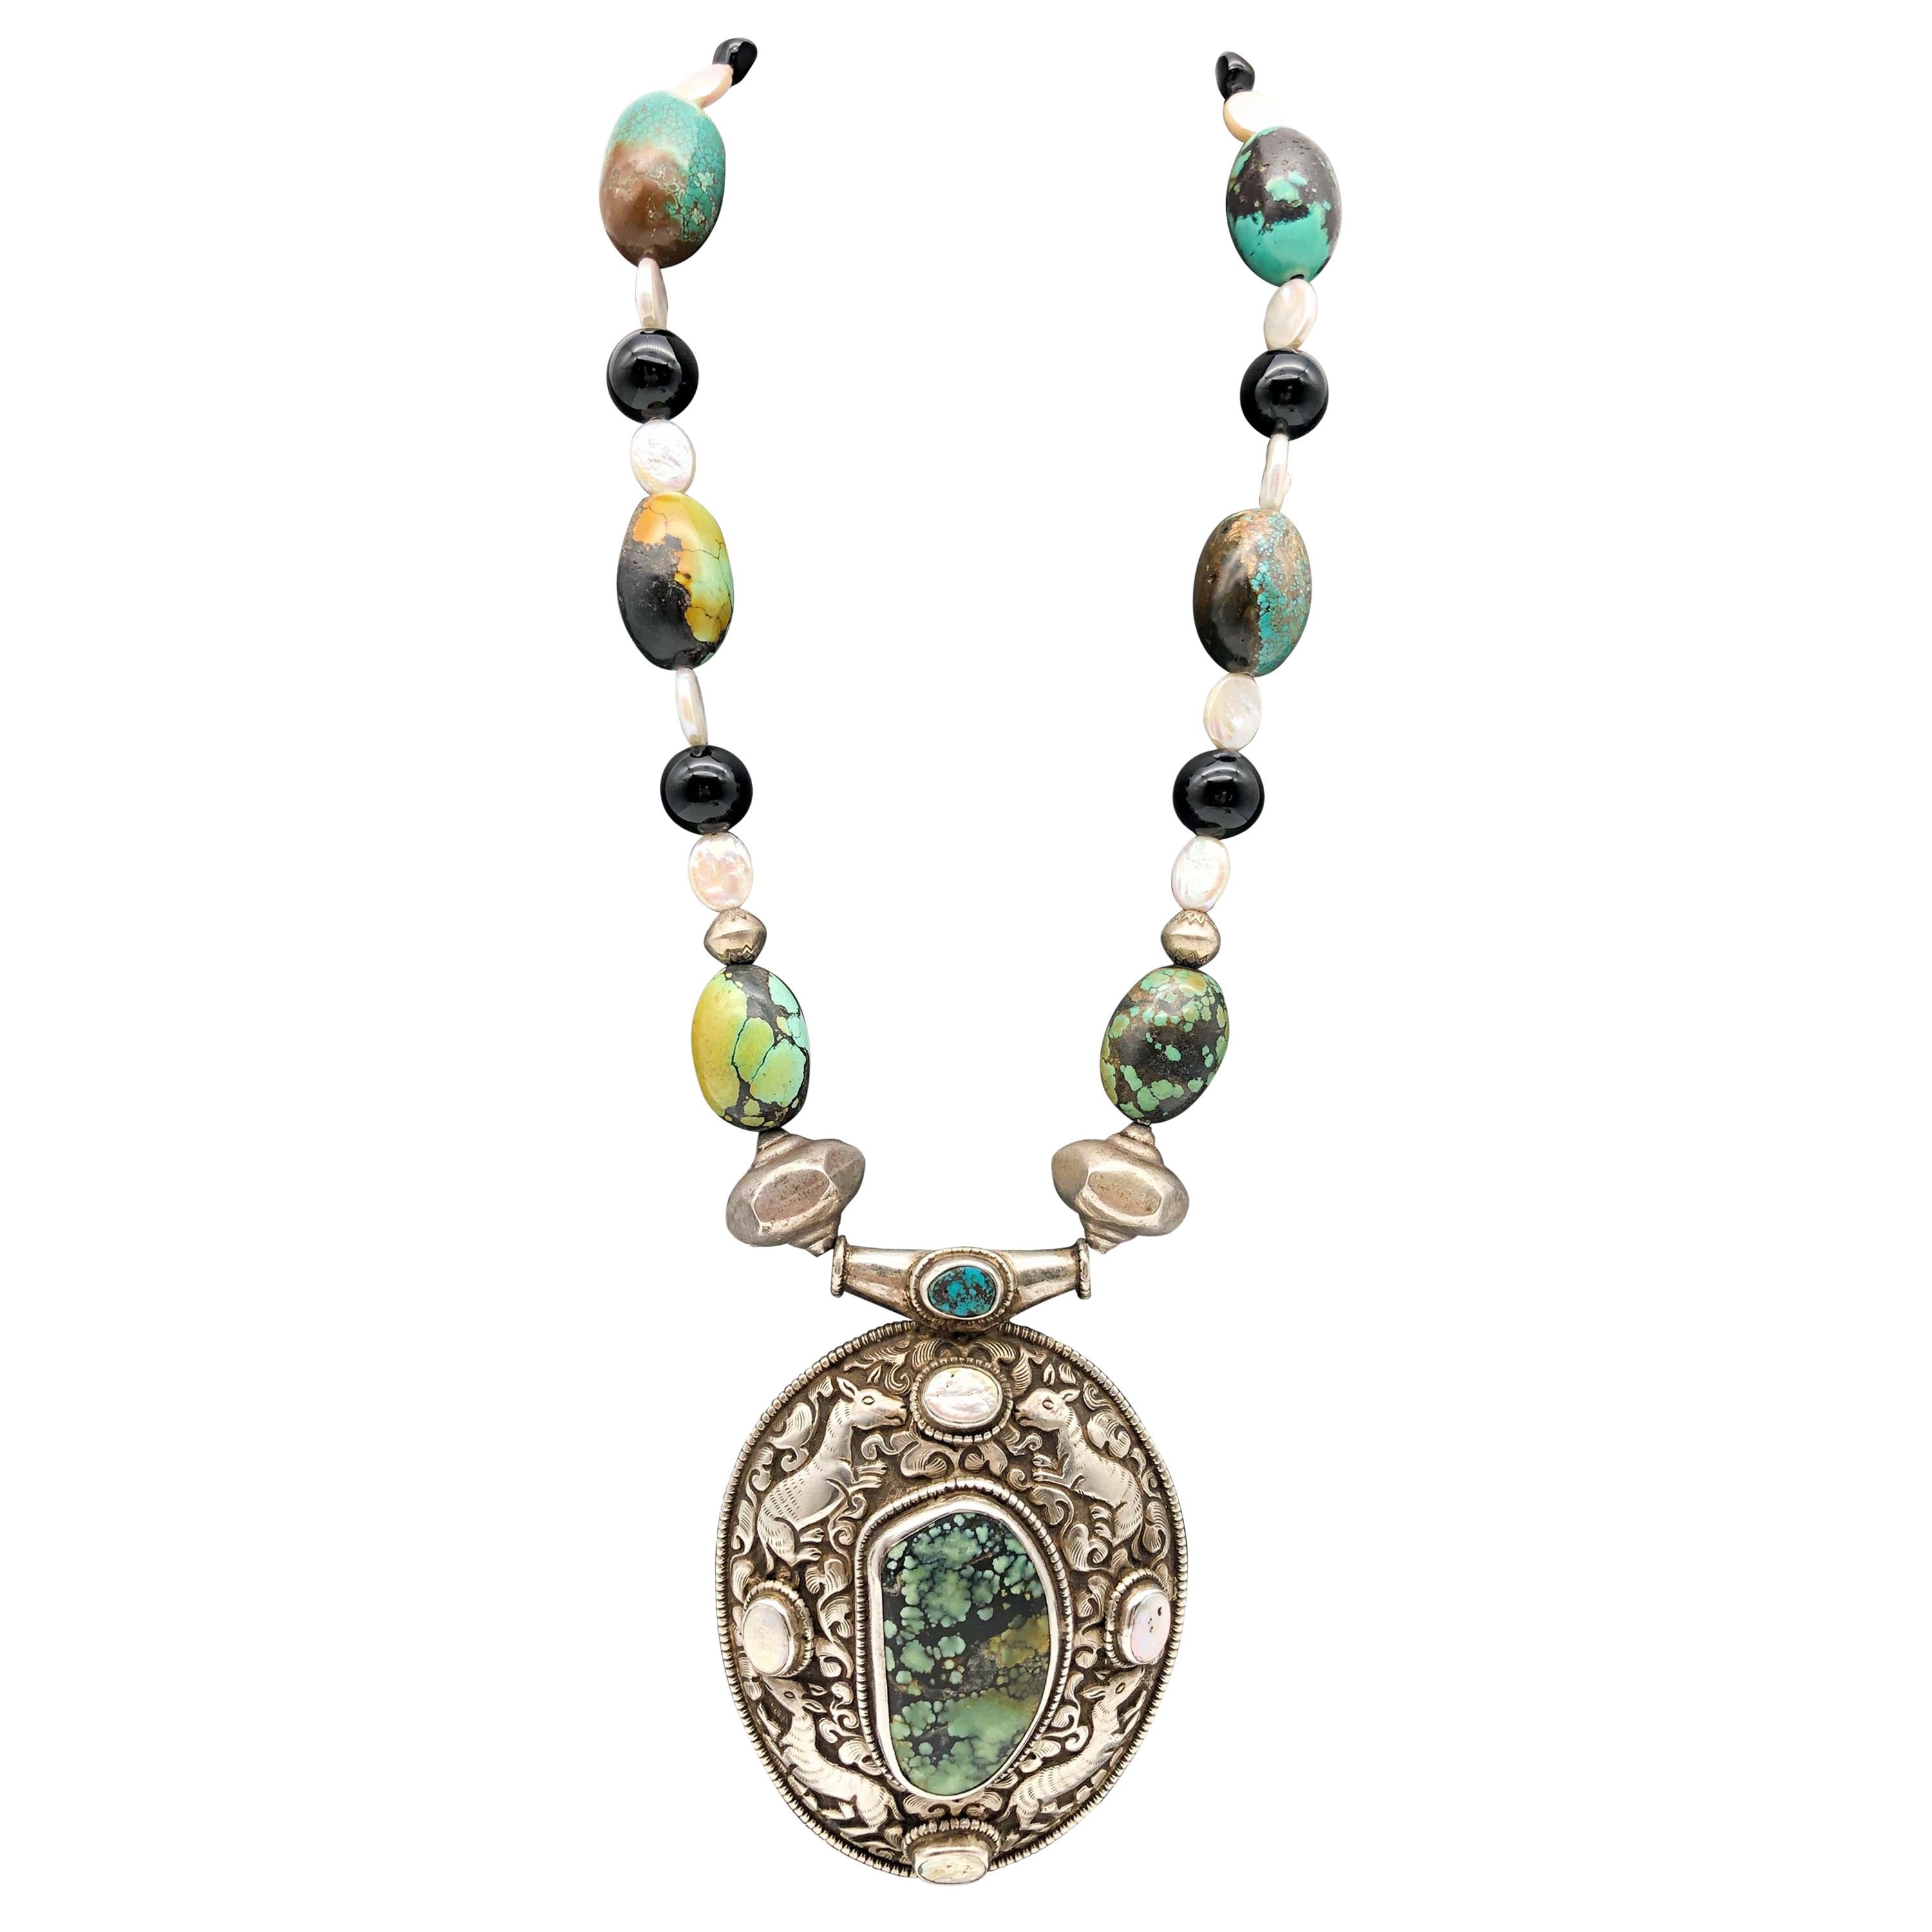 A.Jeschel Marvelous Turquoise necklace with Tibetan Pendant For Sale